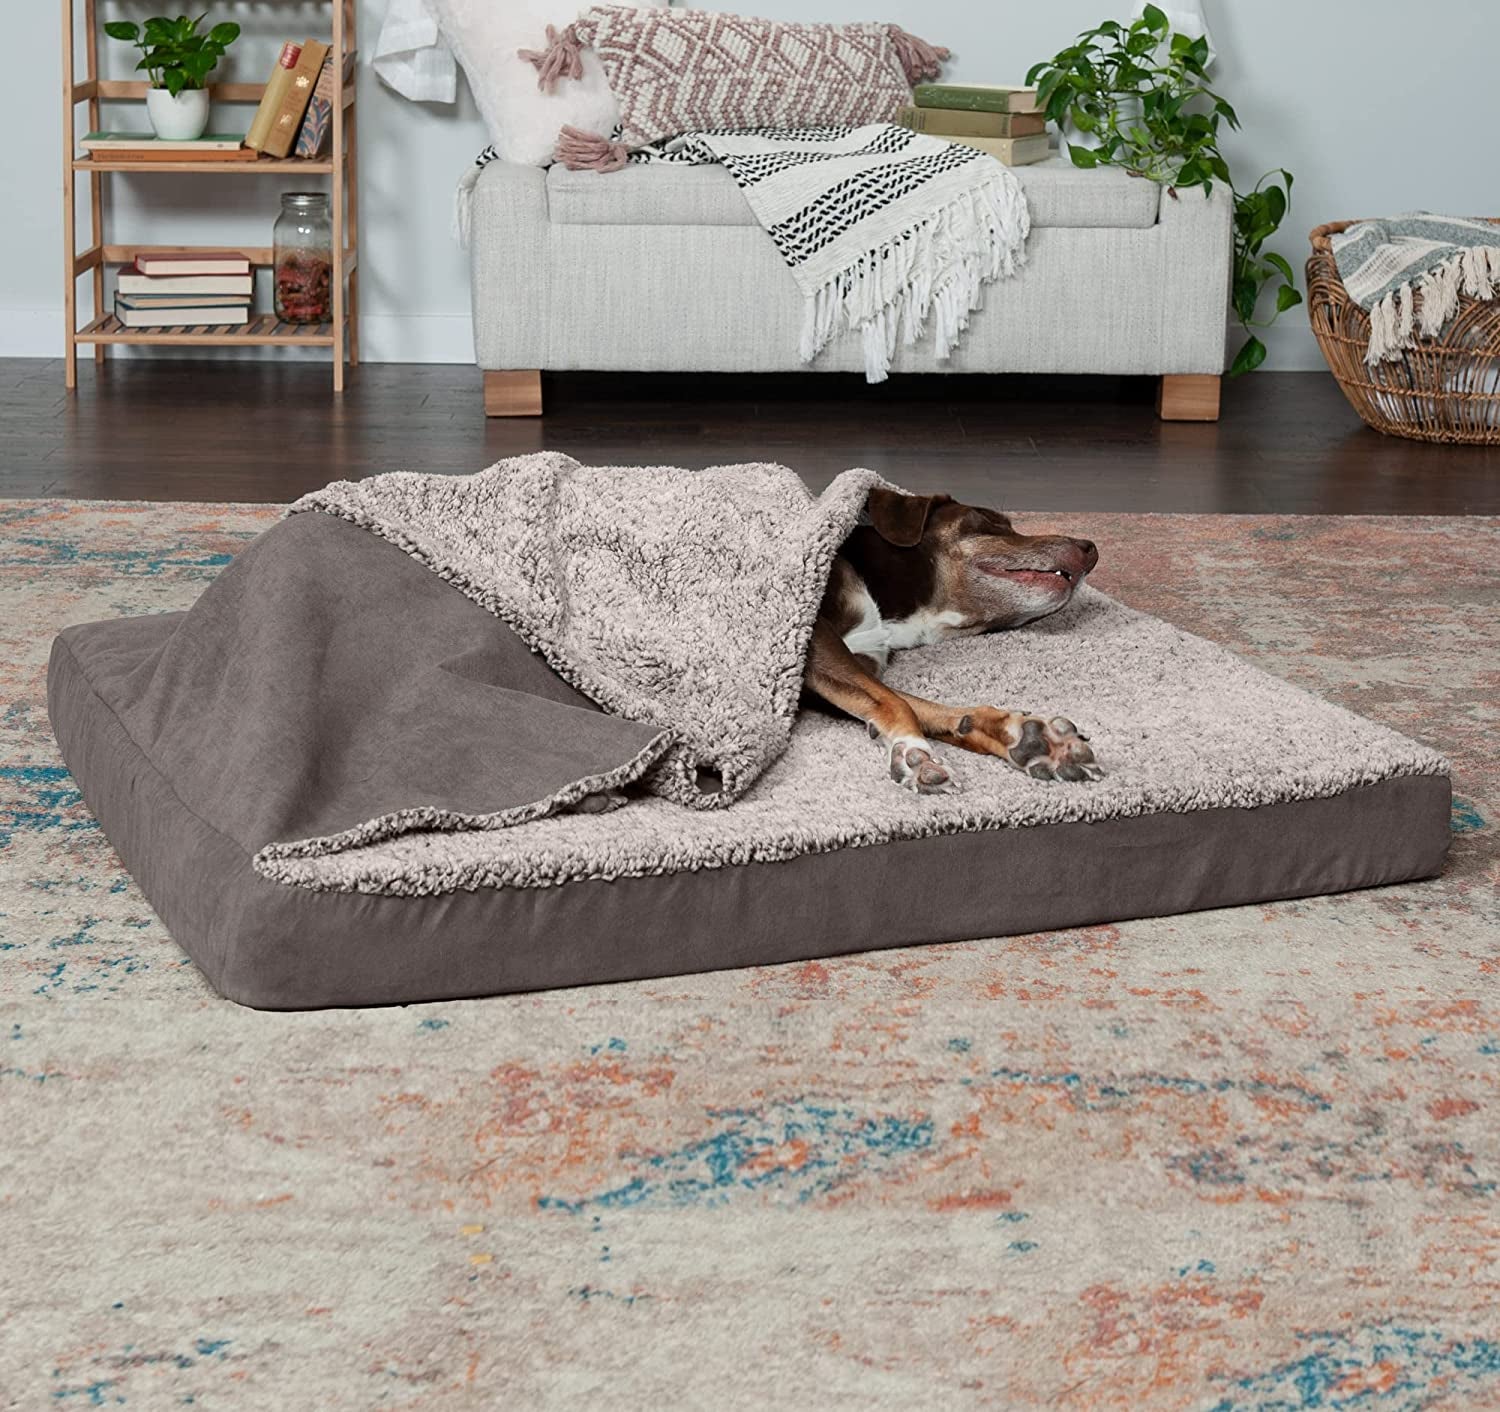 Cooling Gel Dog Bed for Large Dogs W/ Removable Washable Cover, for Dogs up to 95 Lbs - Berber & Suede Blanket Top Mattress - Gray, Jumbo/Xl